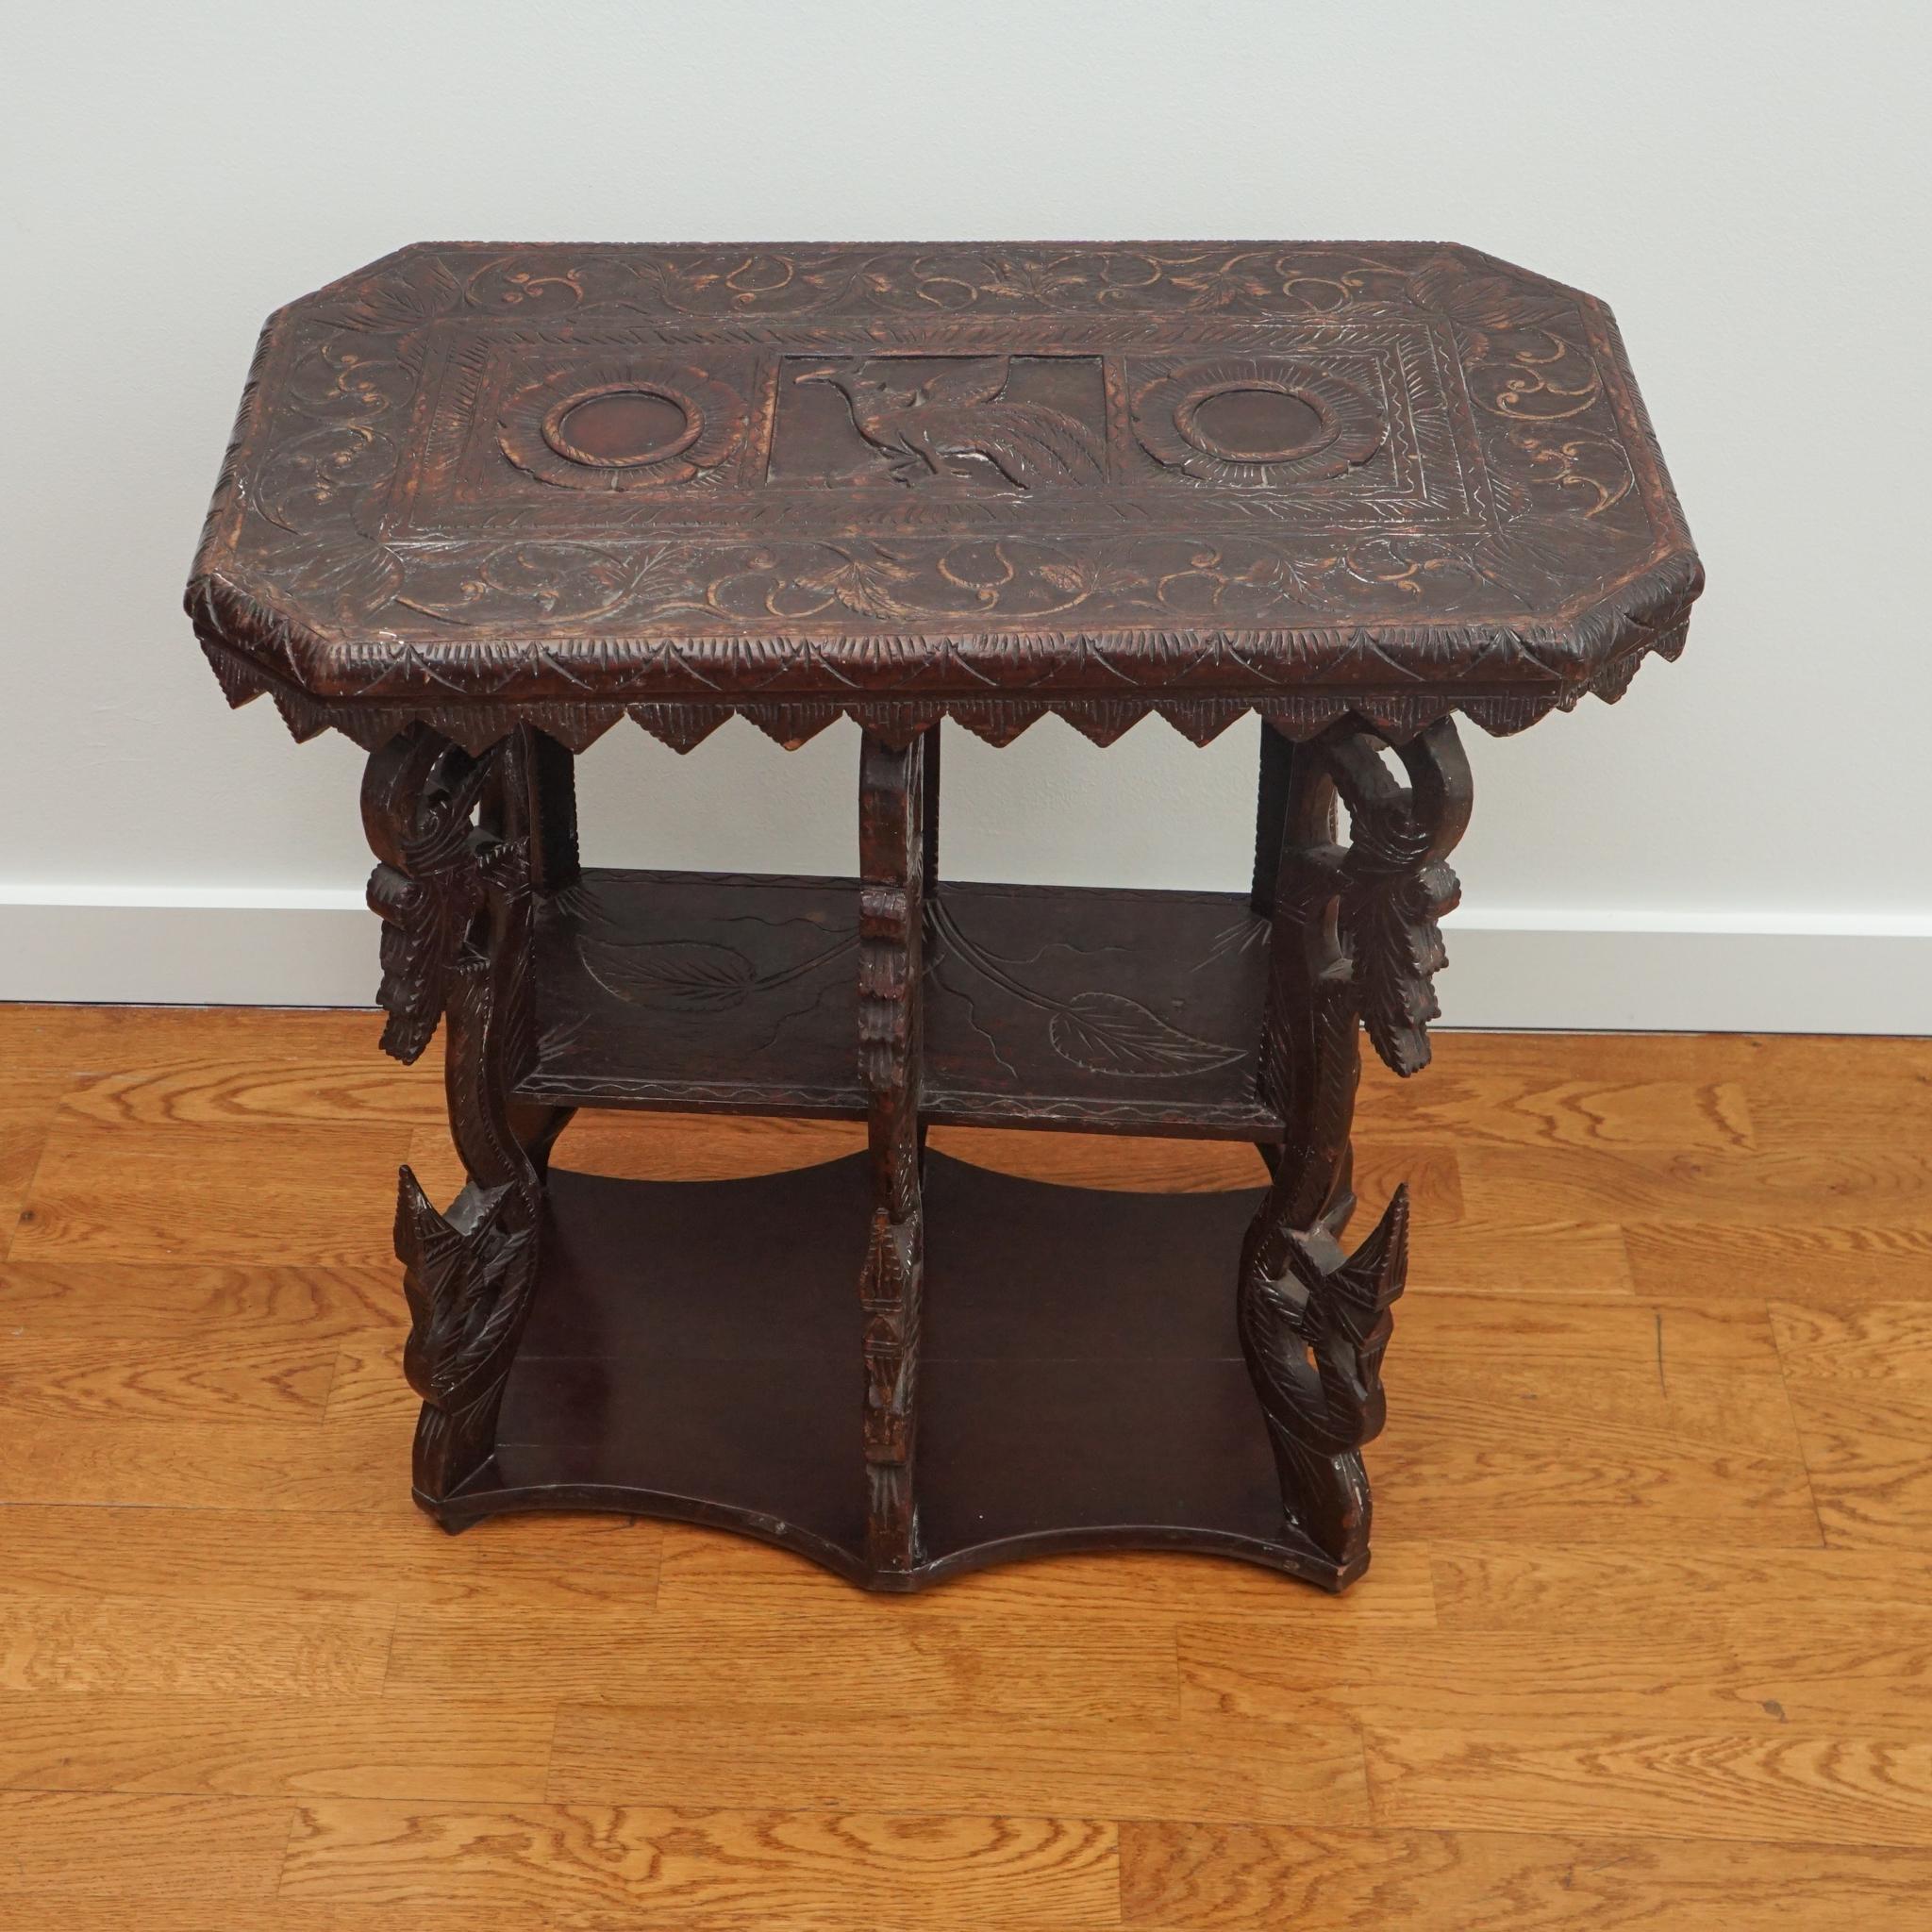 This exquisite Yala accent table is from Ceylon, circa 1871. Made of rosewood, the intricately carved legs and top surface make it truly unique. The table is in very good condition and exhibits a beautiful age-worn patina.